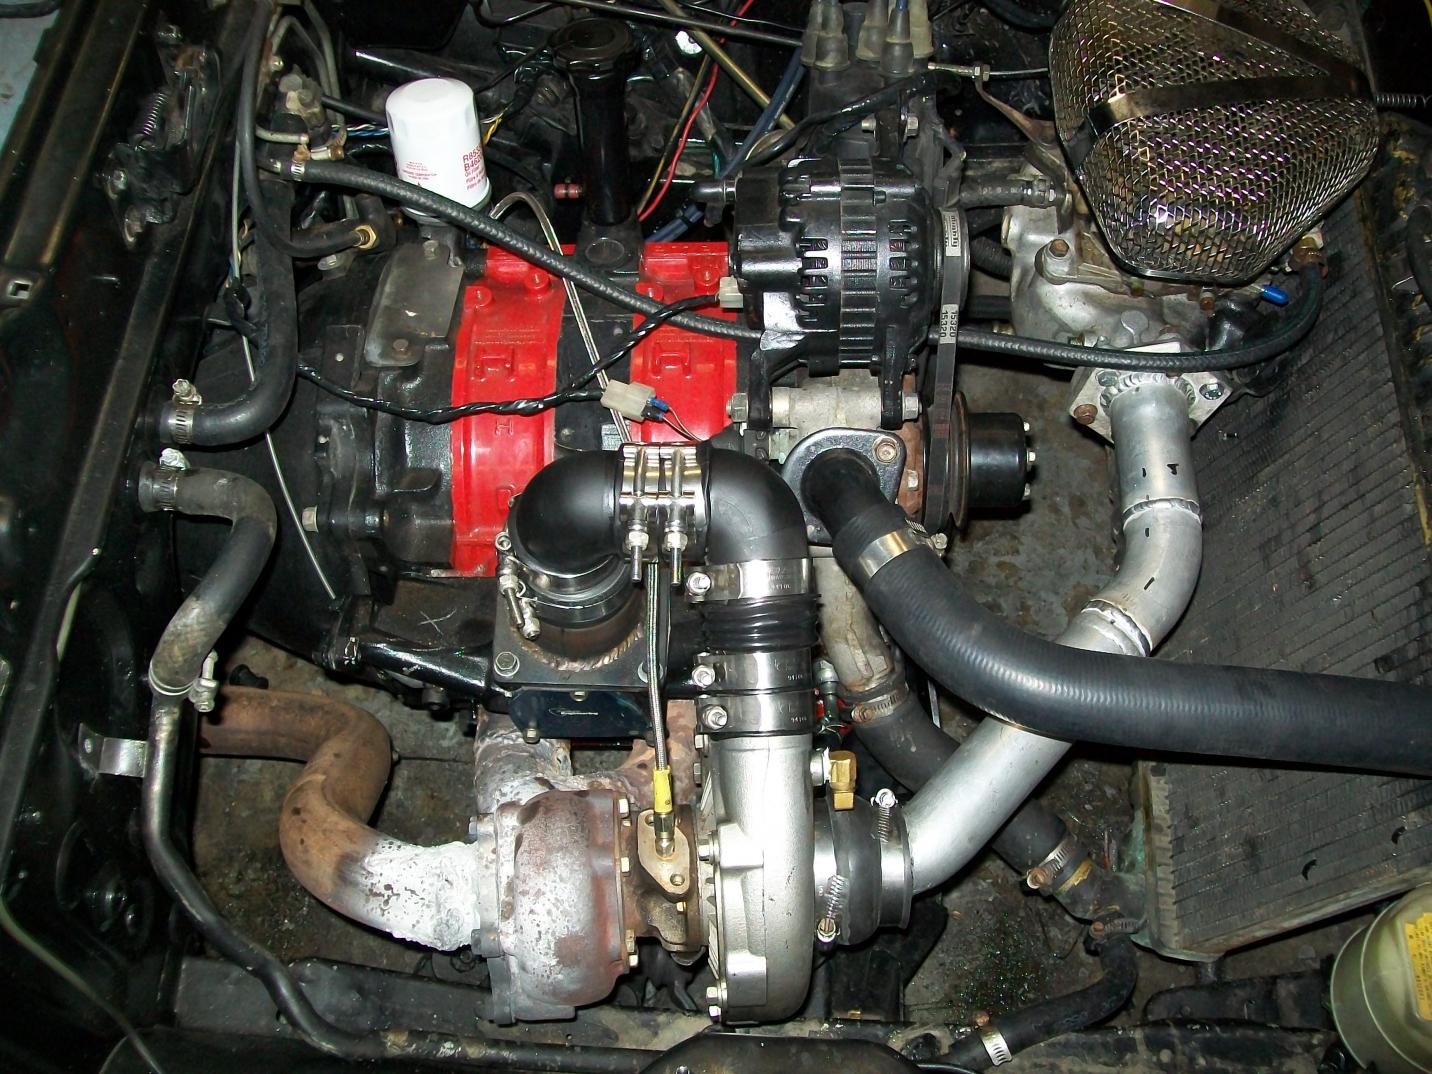 82 12a turbo build and resto lots of pics.